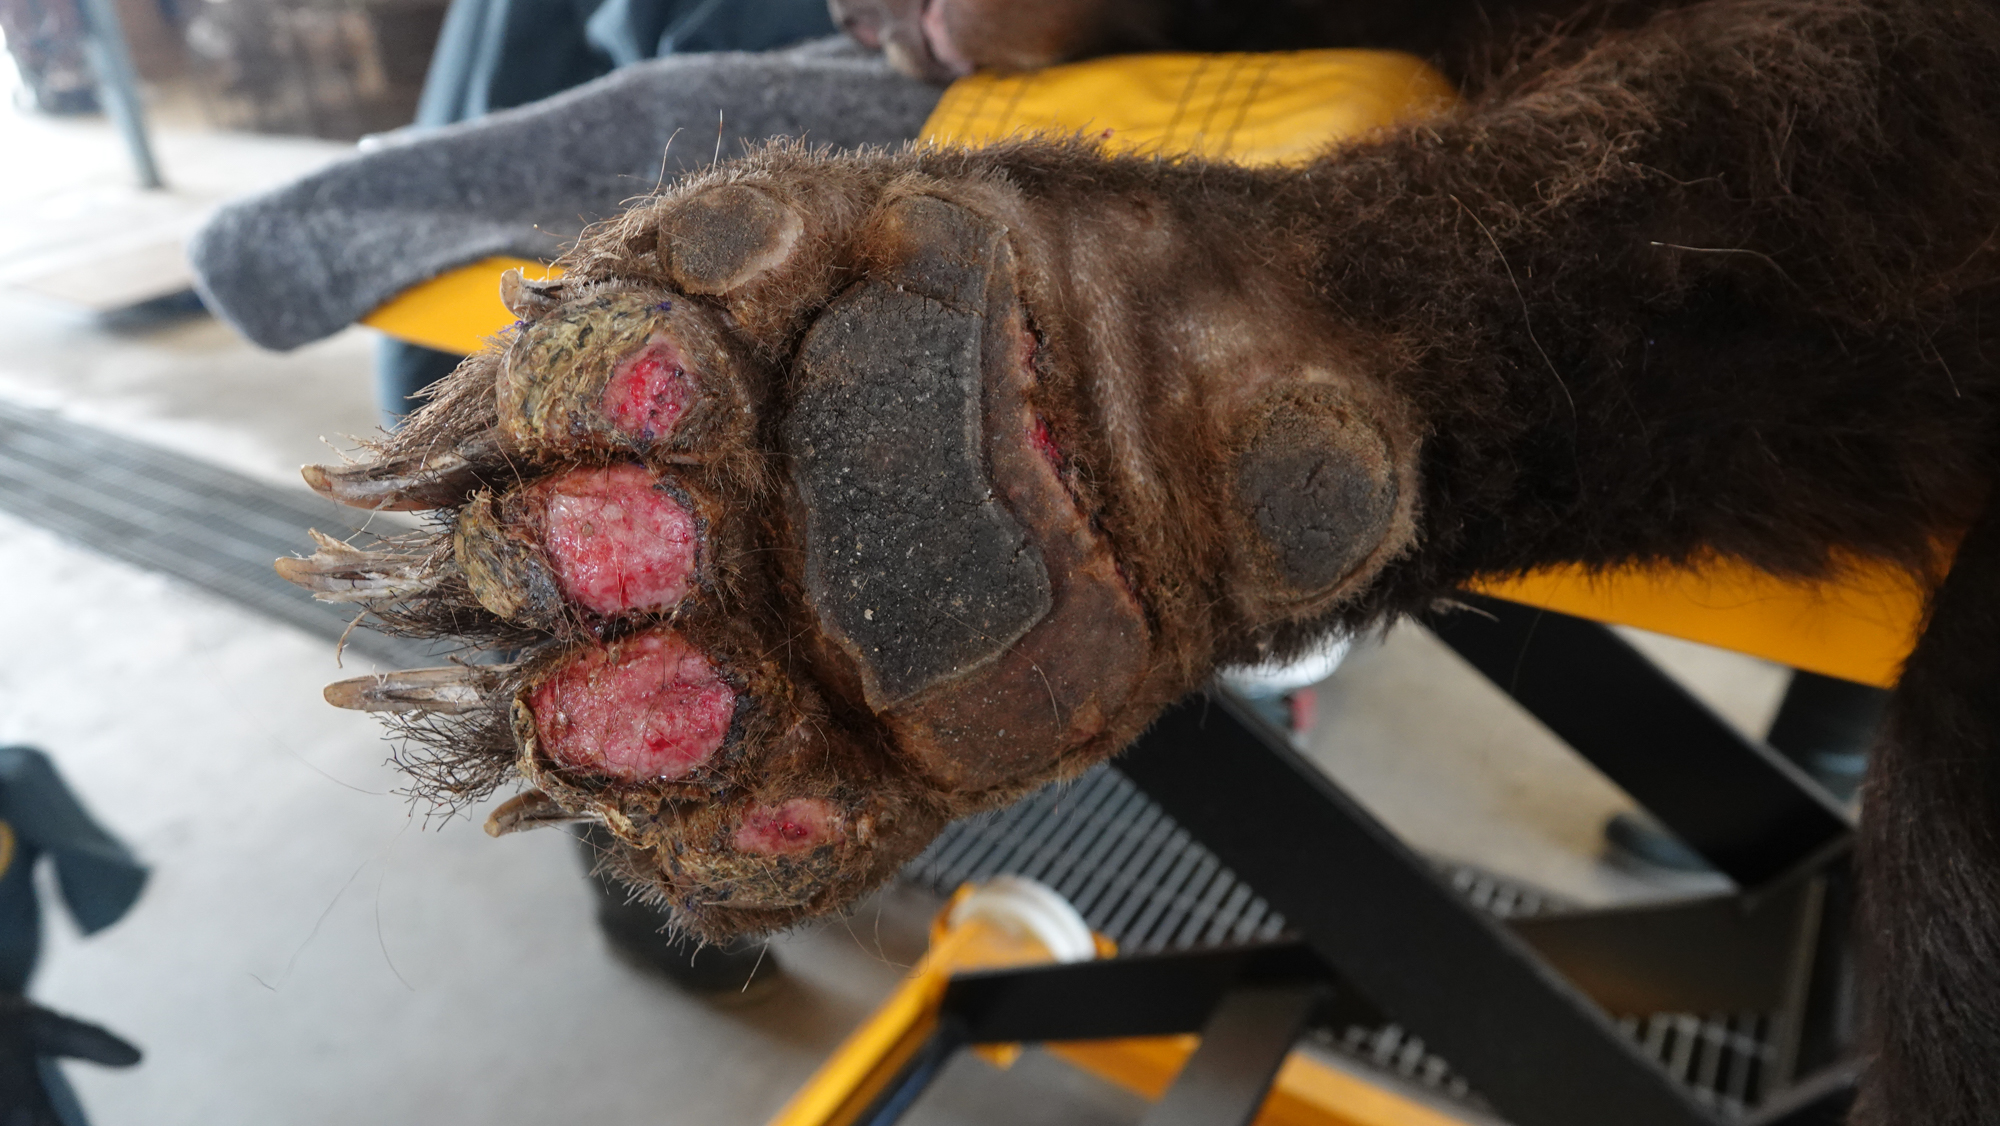 Bear paw with wounds from wildfire burn